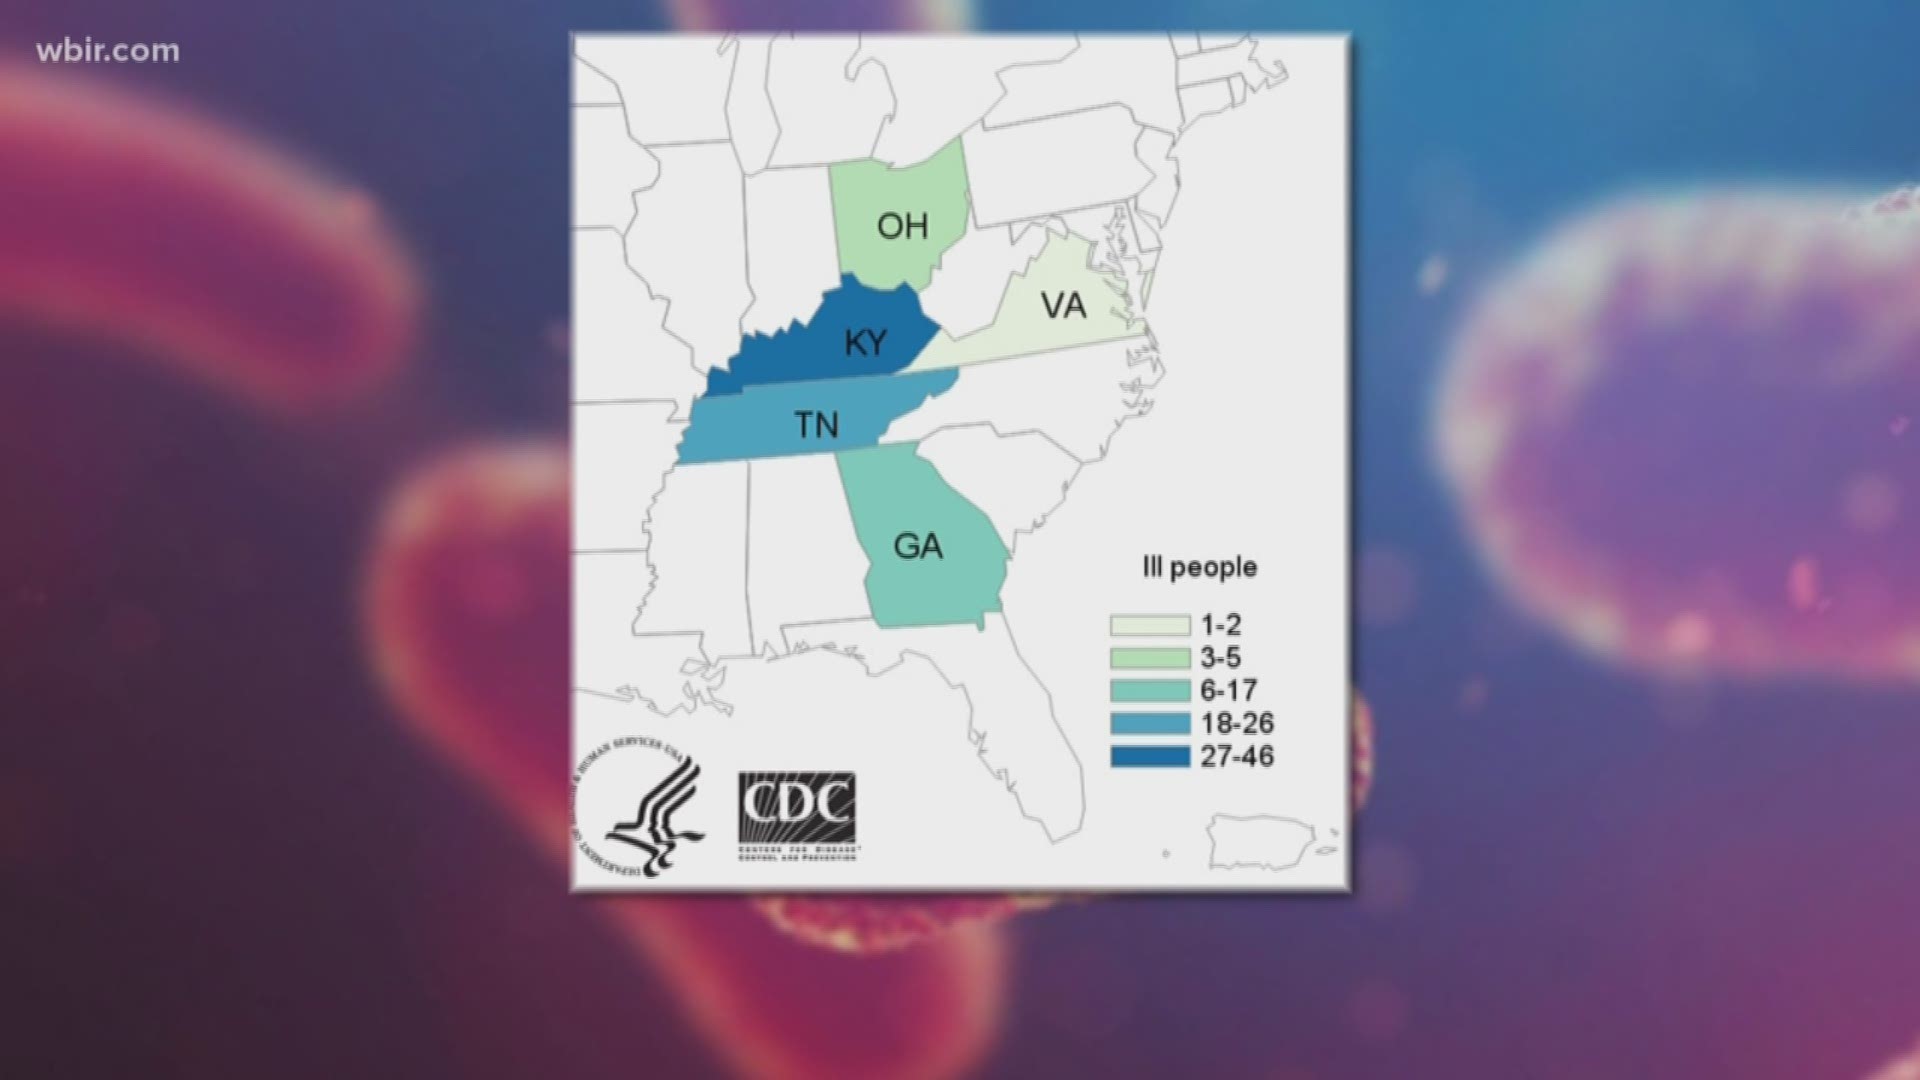 The CDC is warning of an E. Coli outbreak in the U.S., with 26 of 96 reported cases coming from Tennessee.